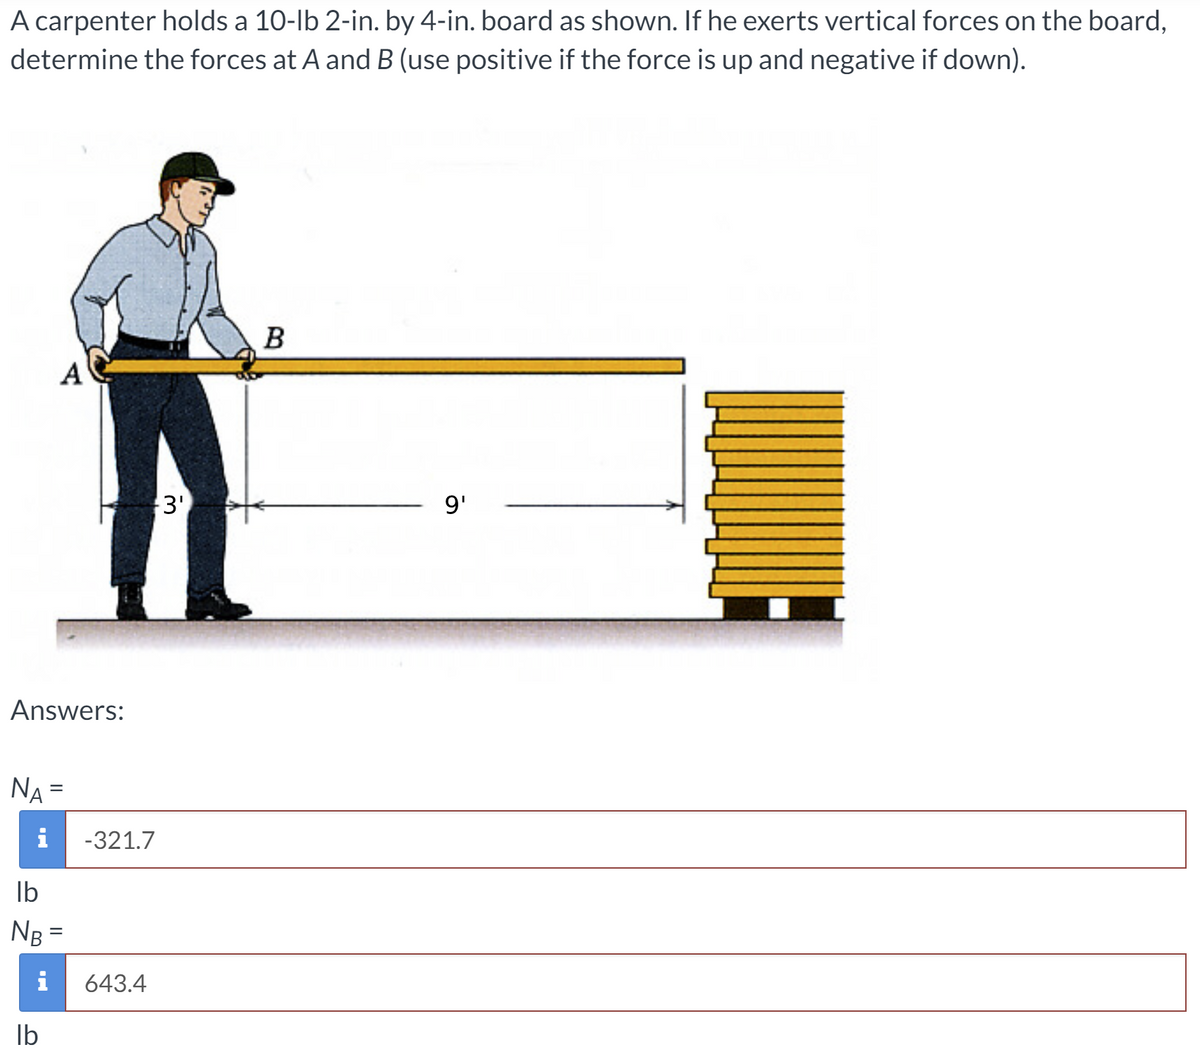 A carpenter holds a 10-lb 2-in. by 4-in. board as shown. If he exerts vertical forces on the board,
determine the forces at A and B (use positive if the force is up and negative if down).
B
A
3'
9'
Answers:
NA
%3D
i
-321.7
Ib
NB =
%3D
i
643.4
Ib
